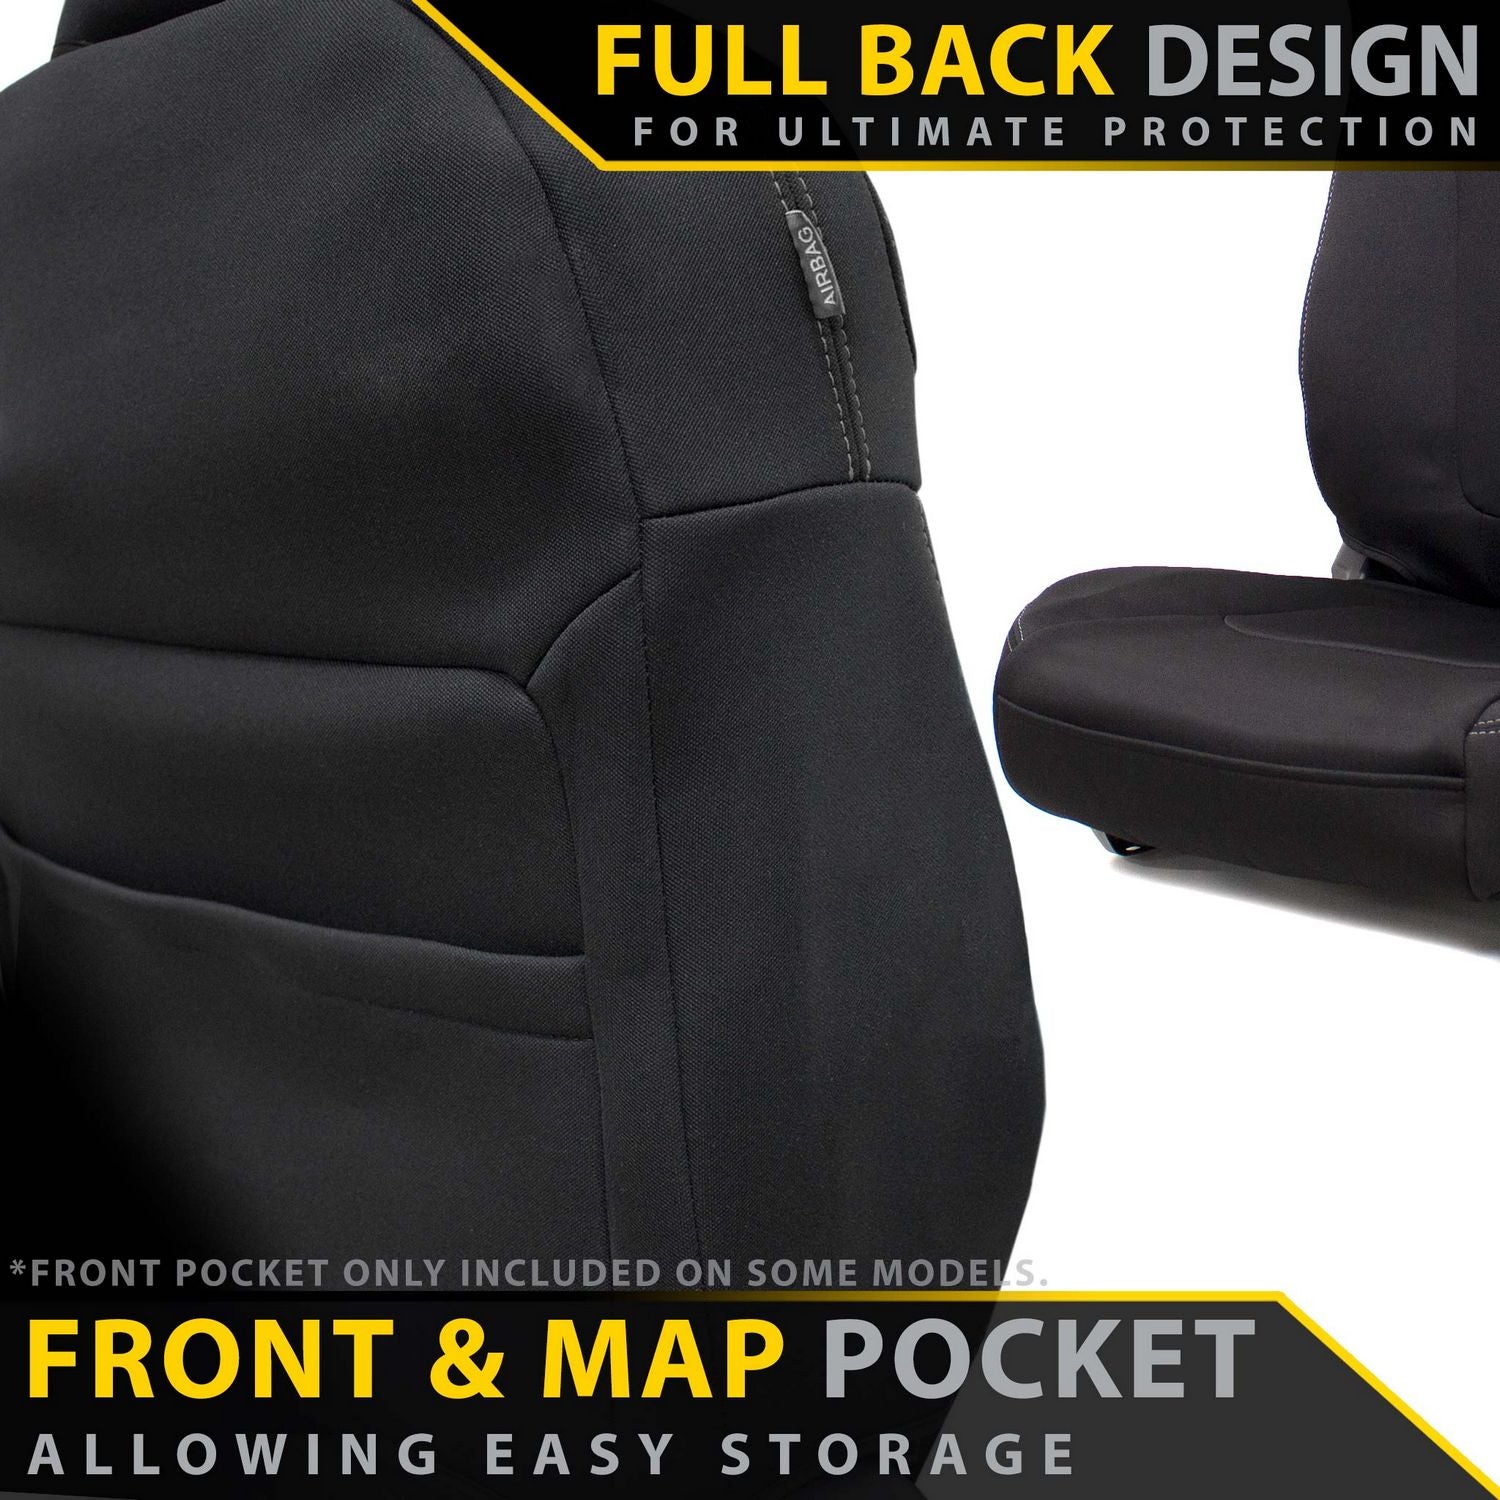 Ford Ranger PJ/PK Neoprene 2x Front Seat Covers (Made to Order)